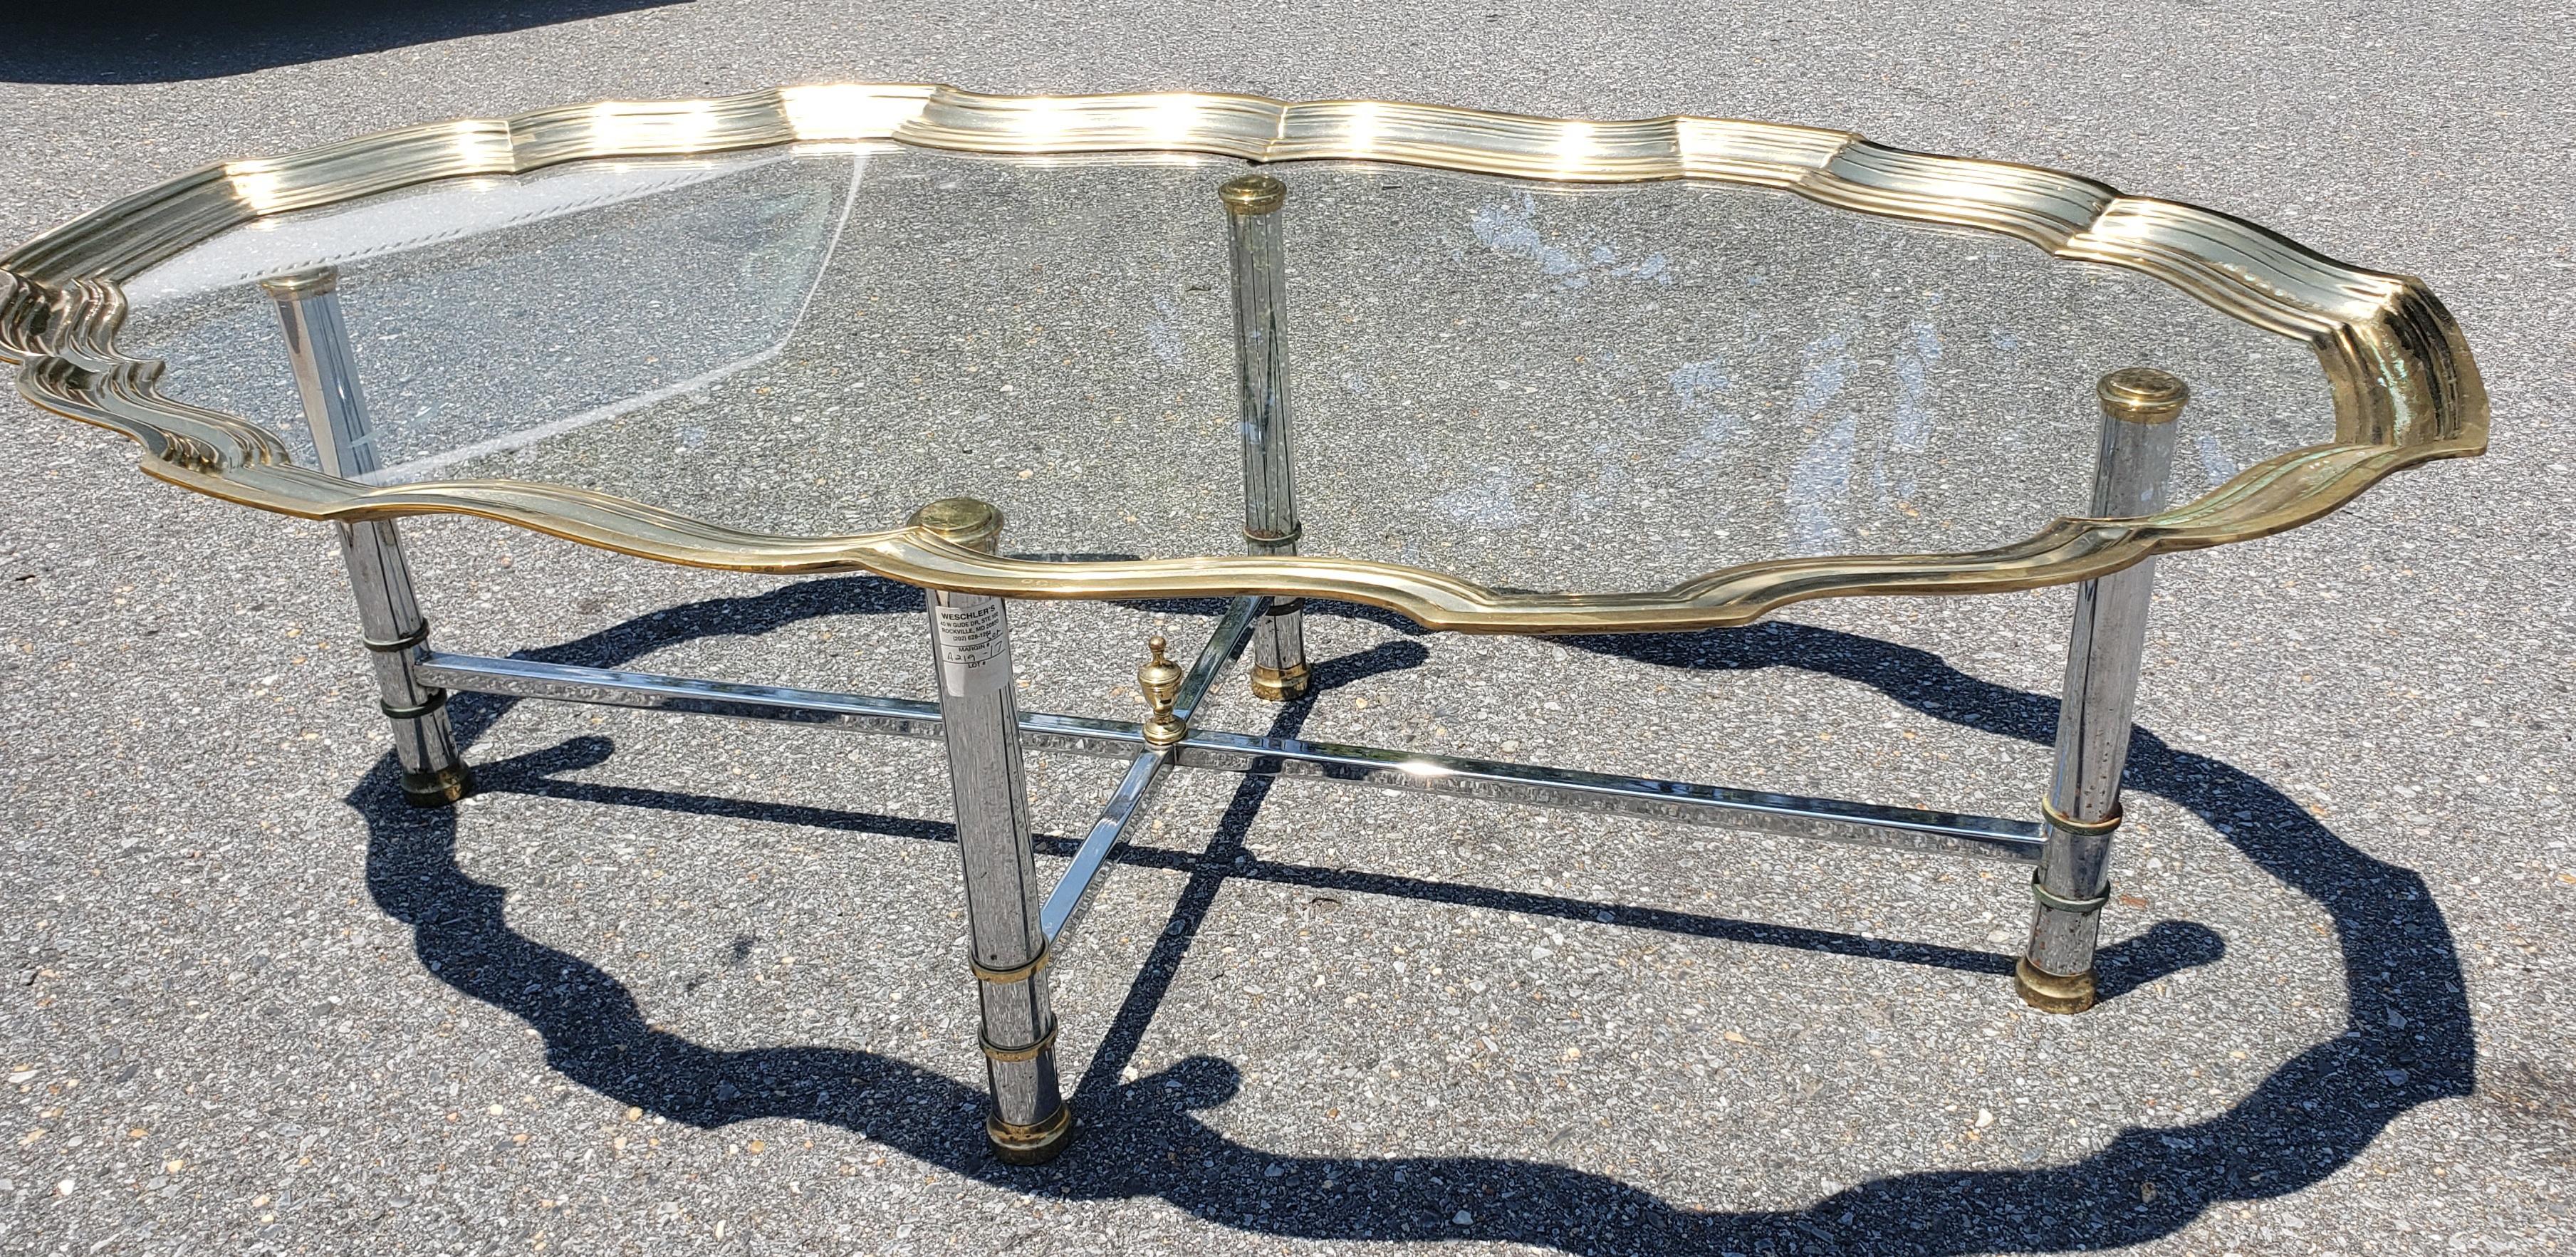 Scalloped Brass and Polished Steel Chrome Glass Top Cocktail Coffee Table In Good Condition For Sale In Germantown, MD